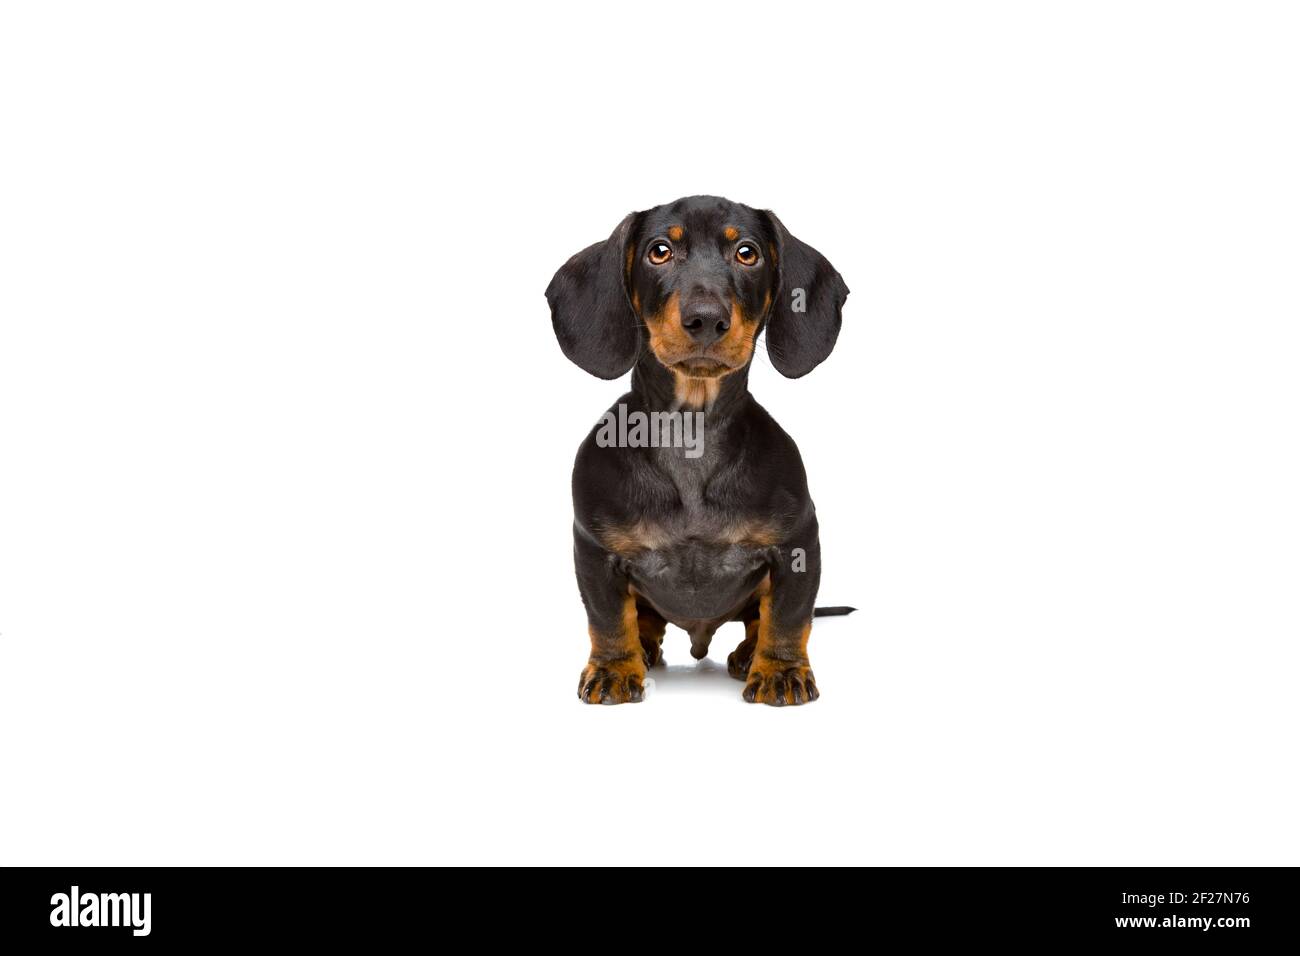 Small young dachshund Stock Photo